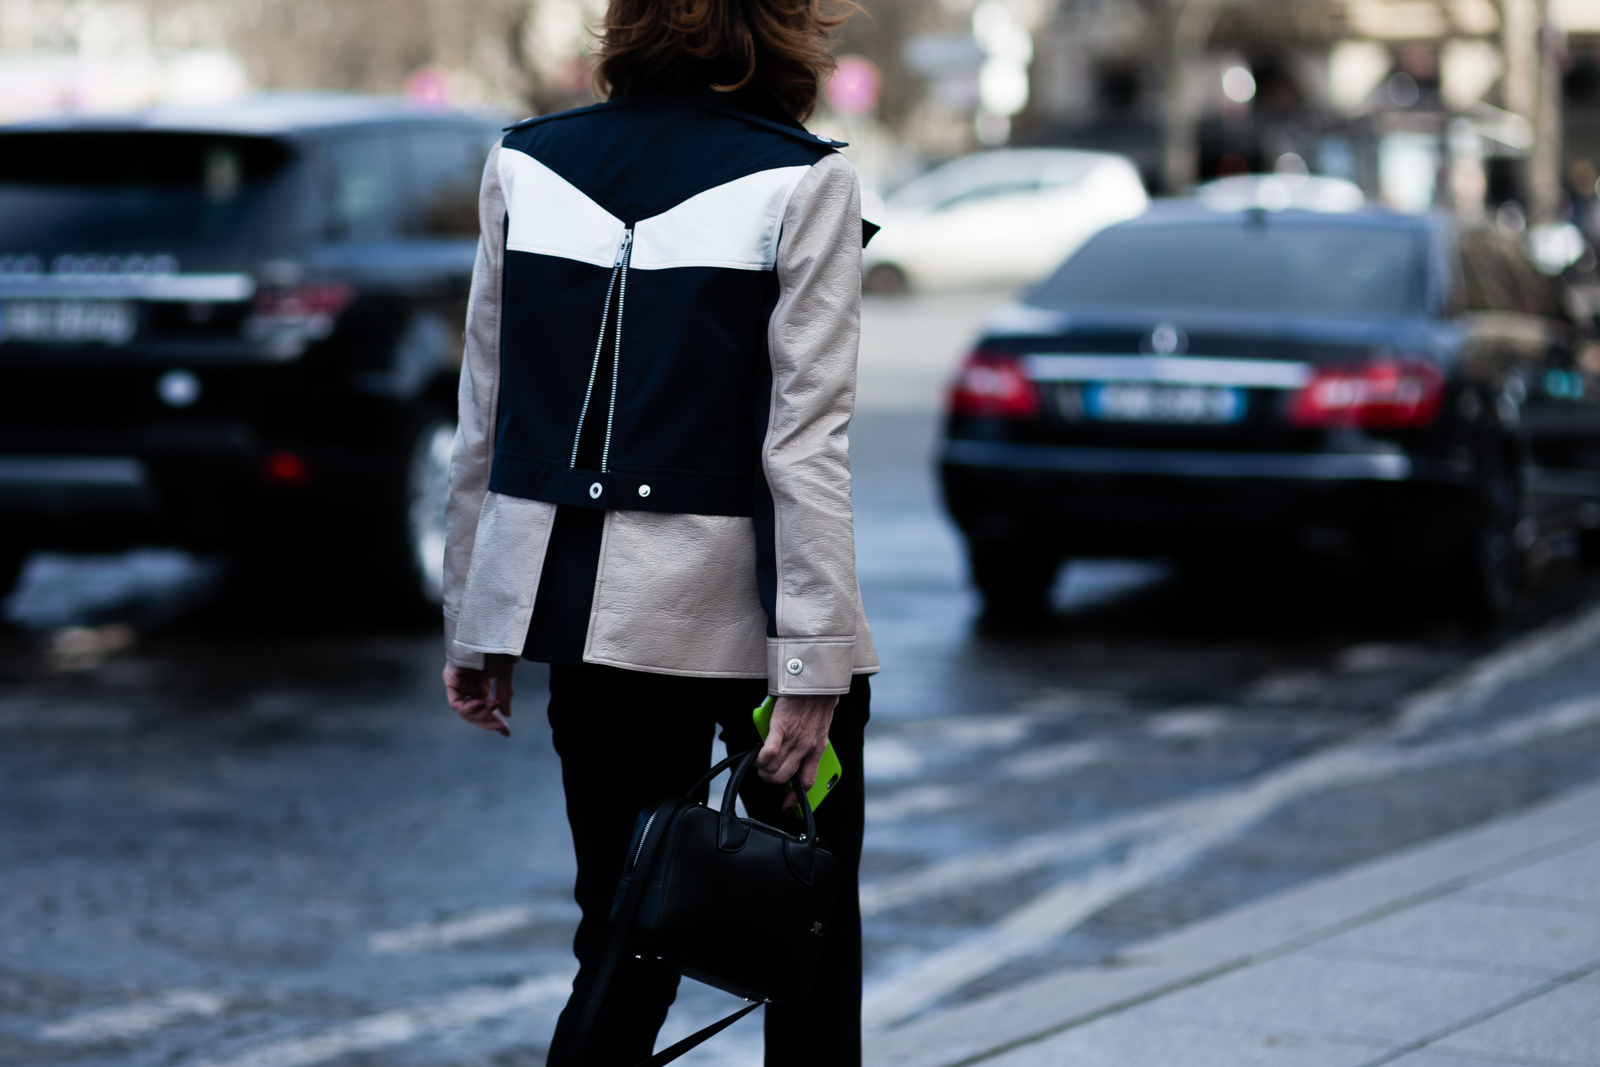 A woman wearing a Courrèges jacket after the Courrèges Fall 2016 fashion show in Paris, France